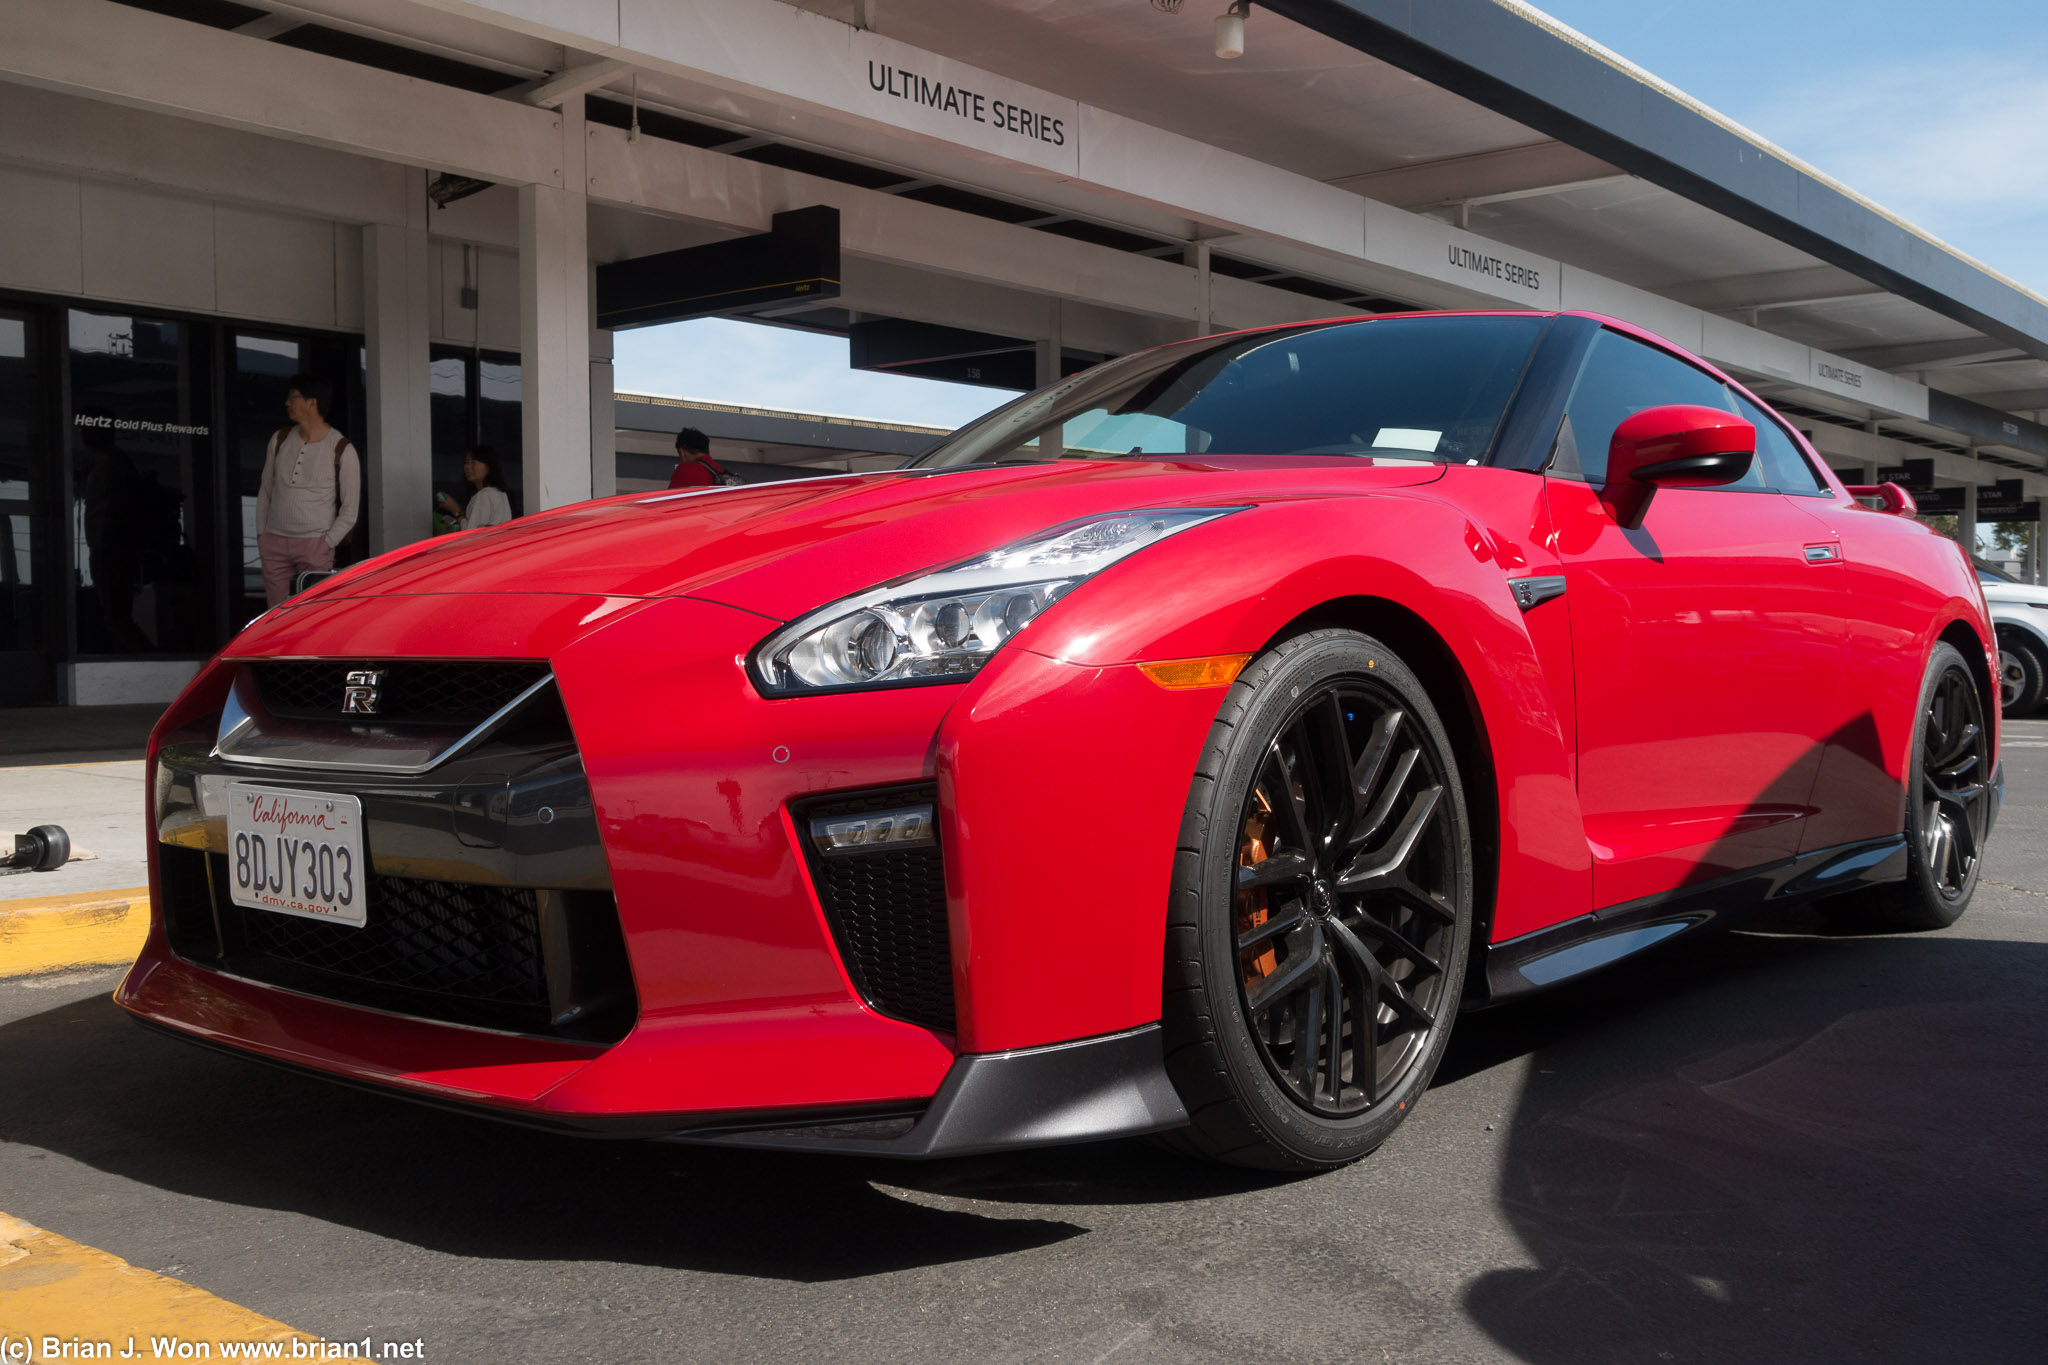 And another GT-R rental in the fleet-- so they have at least 2 at this location!